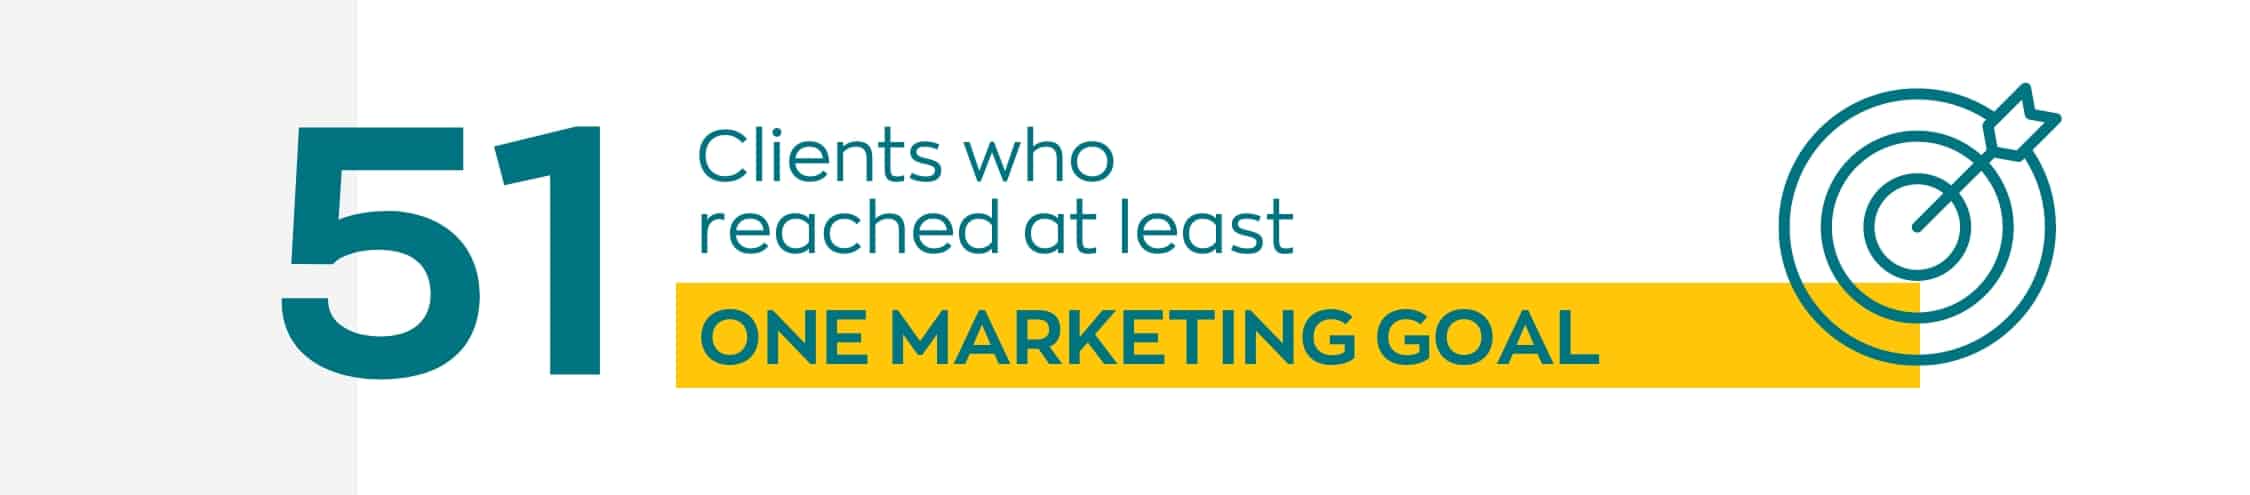 51 clients who reached reached at least one marketing goal